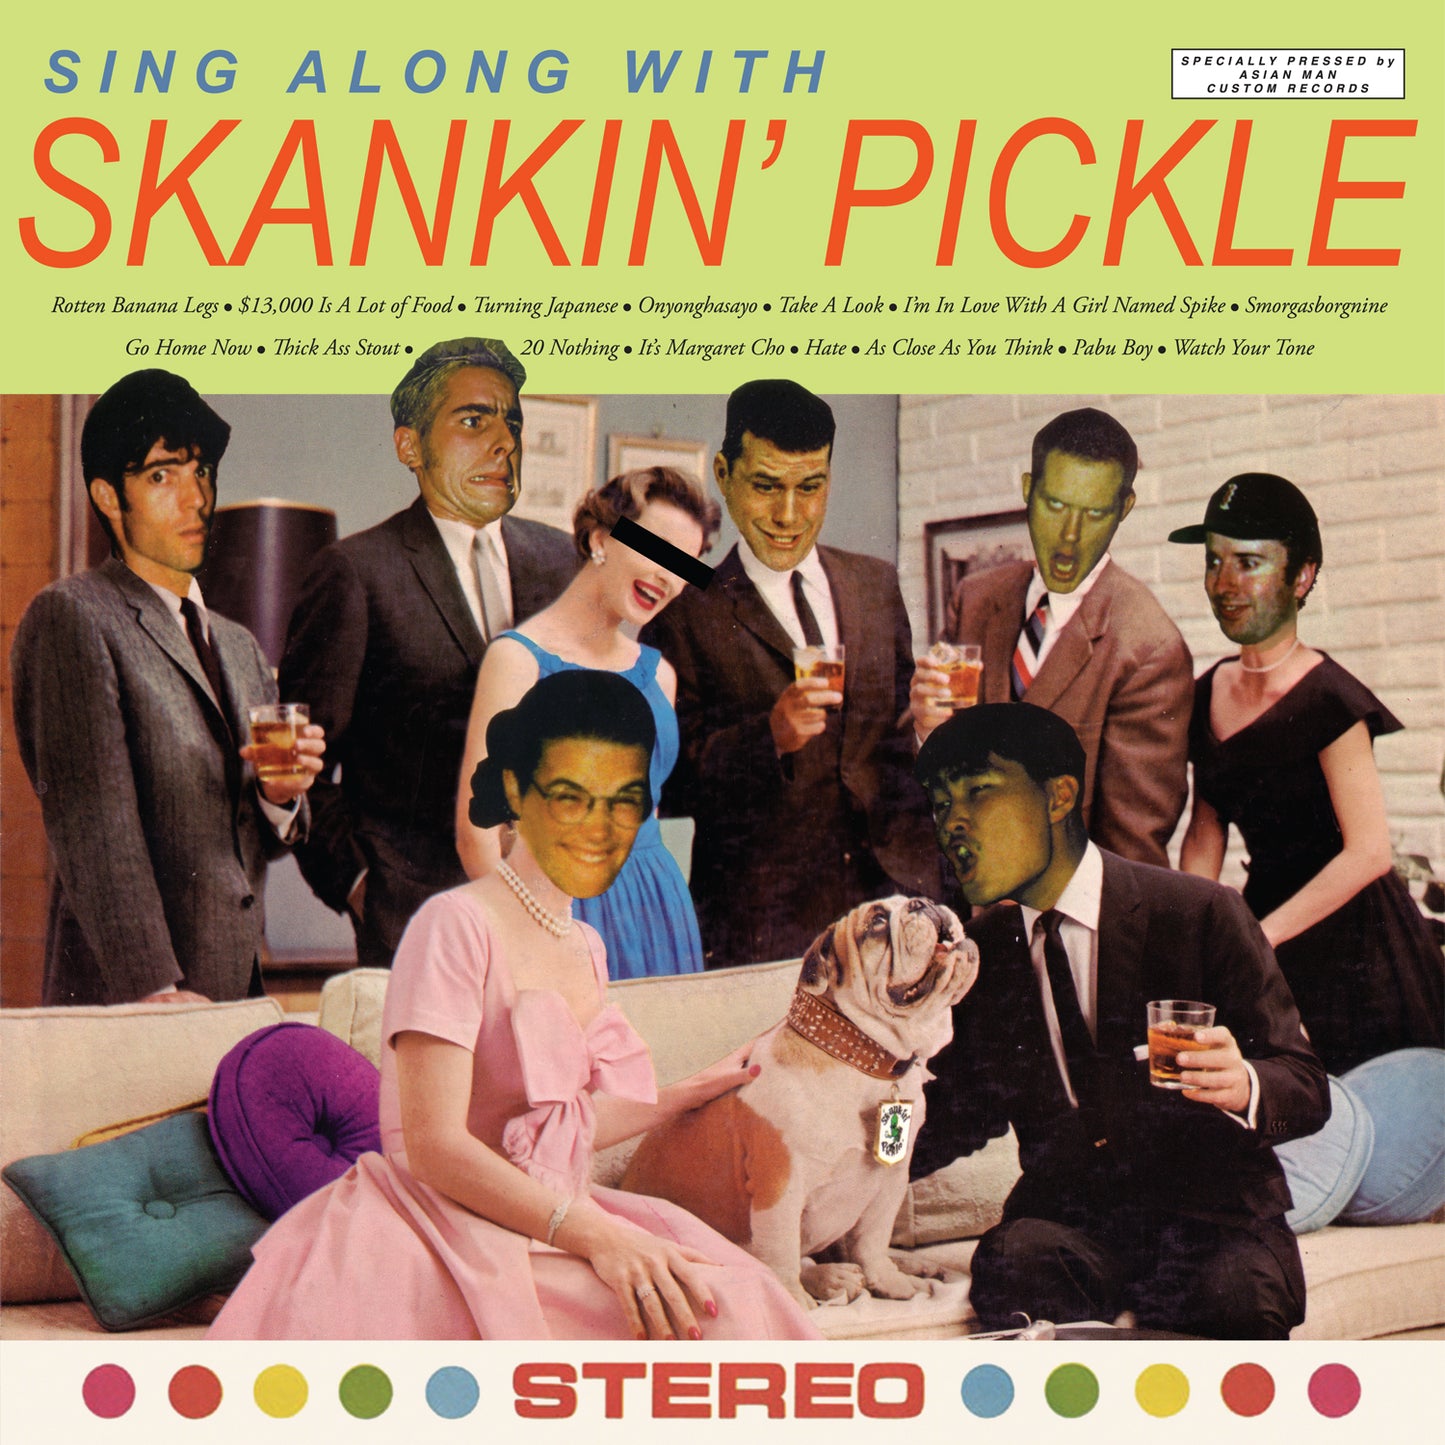 Skankin Pickle "Sing Along With..." LP